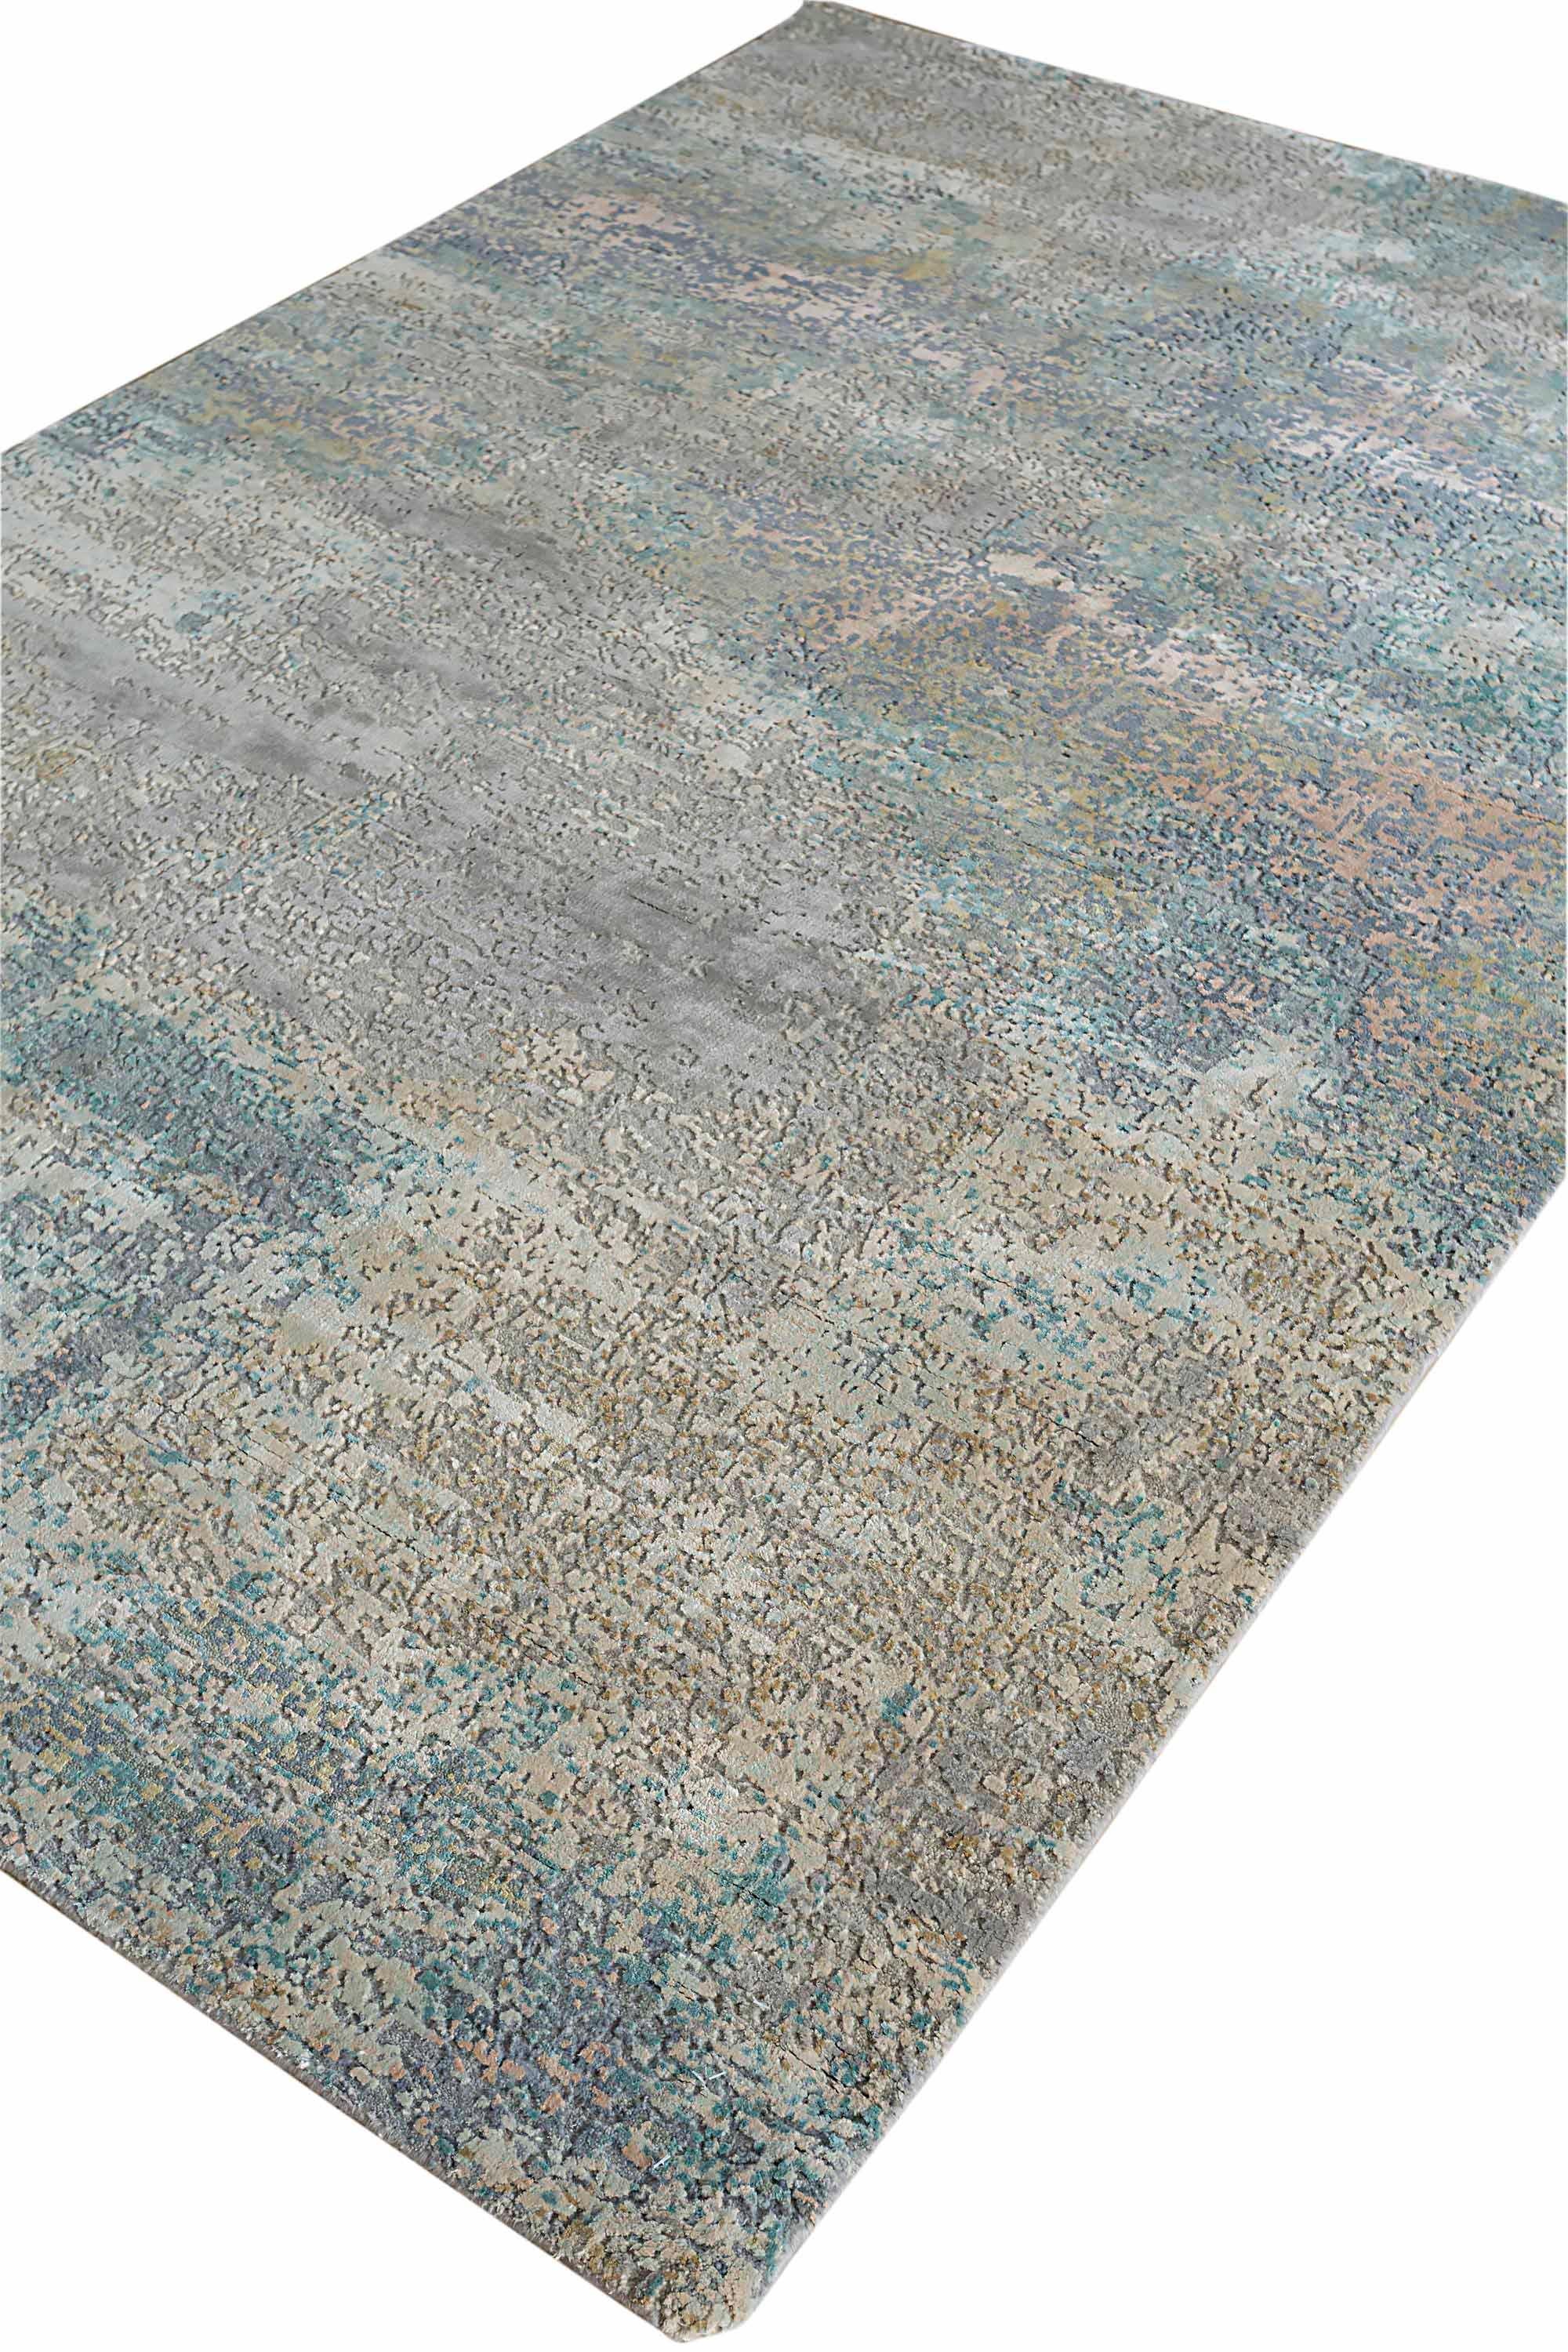 New area rug handwoven from the finest sheep’s wool and real silk. It’s colored with all-natural vegetable dyes that are safe for humans and pets. It features beautiful modern watercolor art design patterns that blend perfectly with contemporary